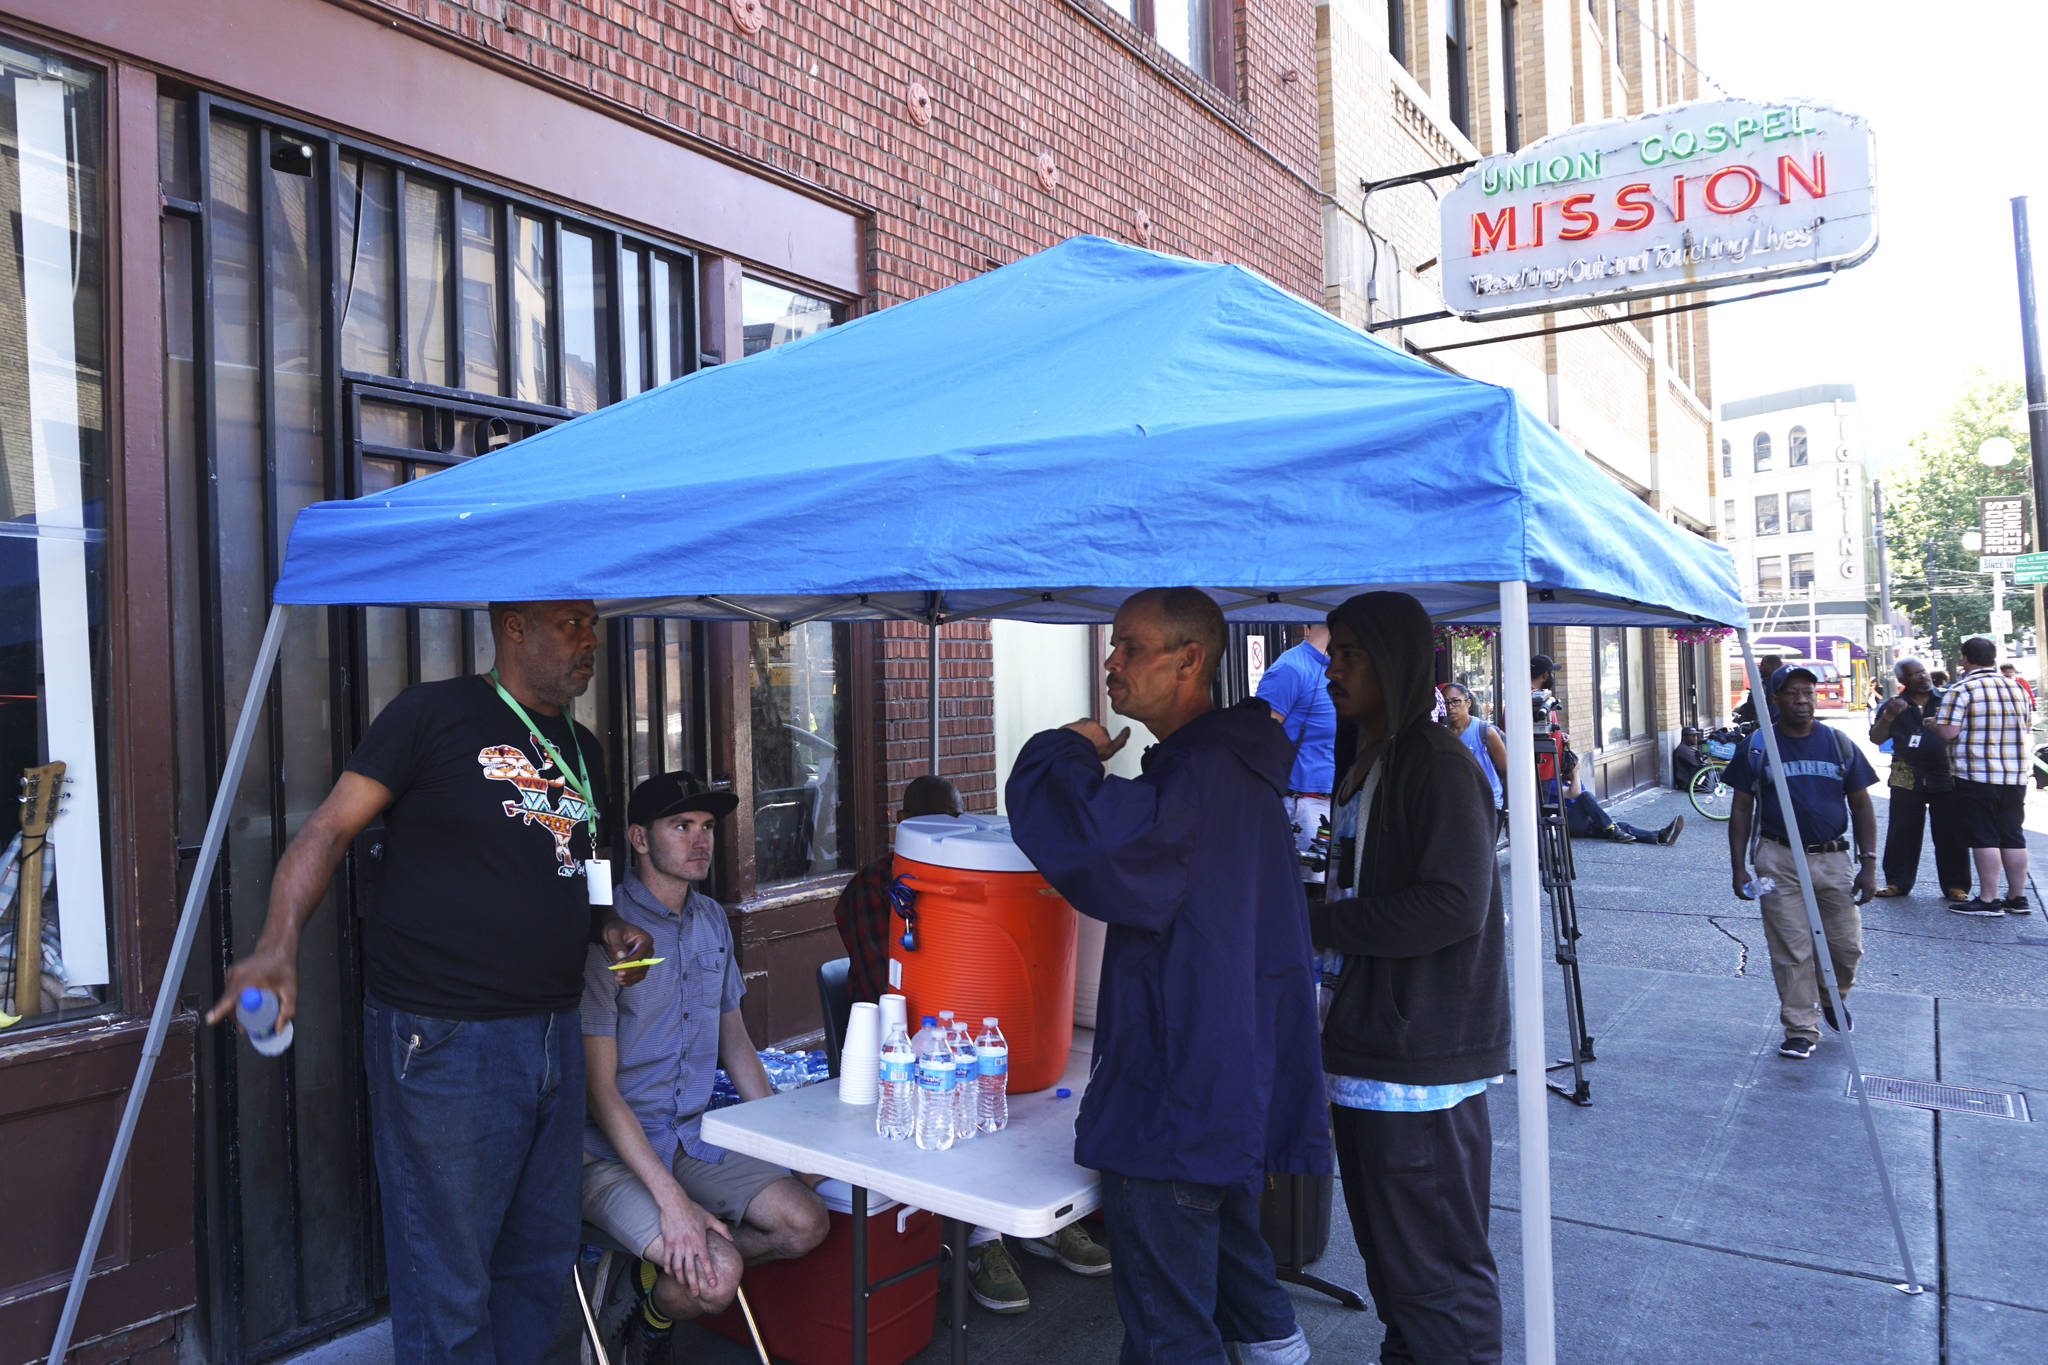 Seattle’s Union Gospel Mission hydration station serves people experiencing homelessness when the temperatures reaches the 80s. Photo by Melissa Hellmann